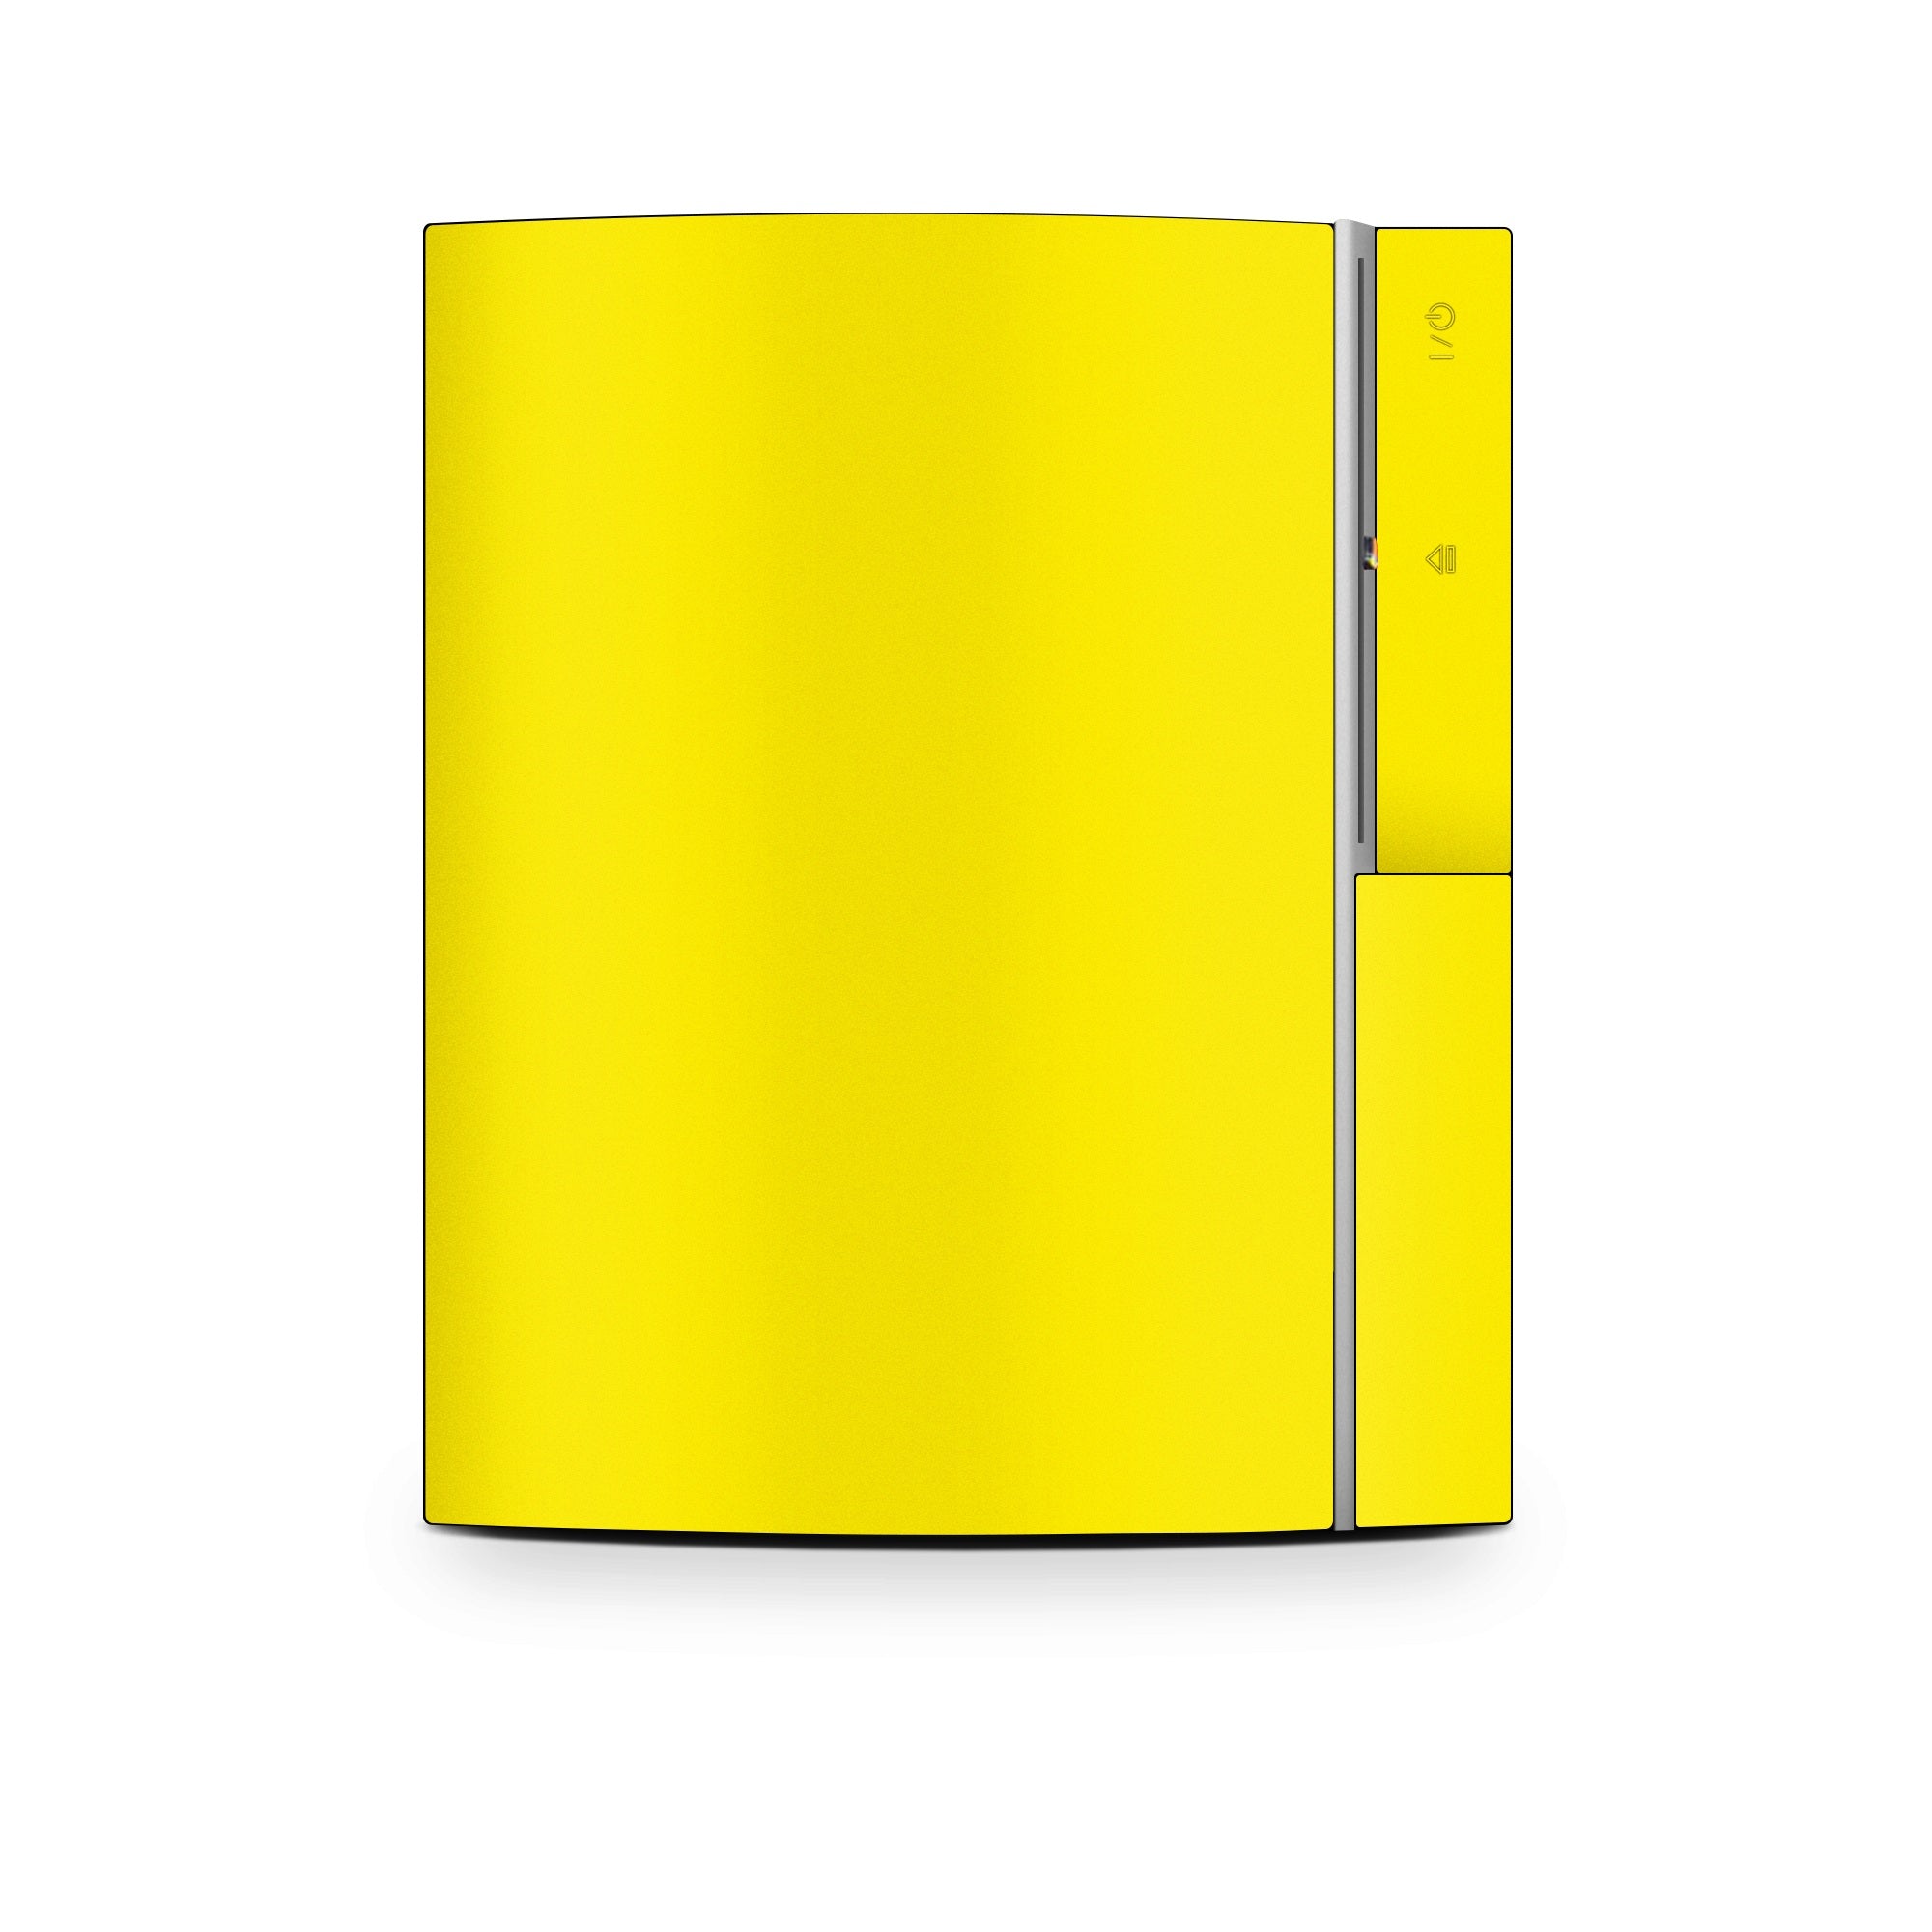 Solid State Yellow - Sony PS3 Skin